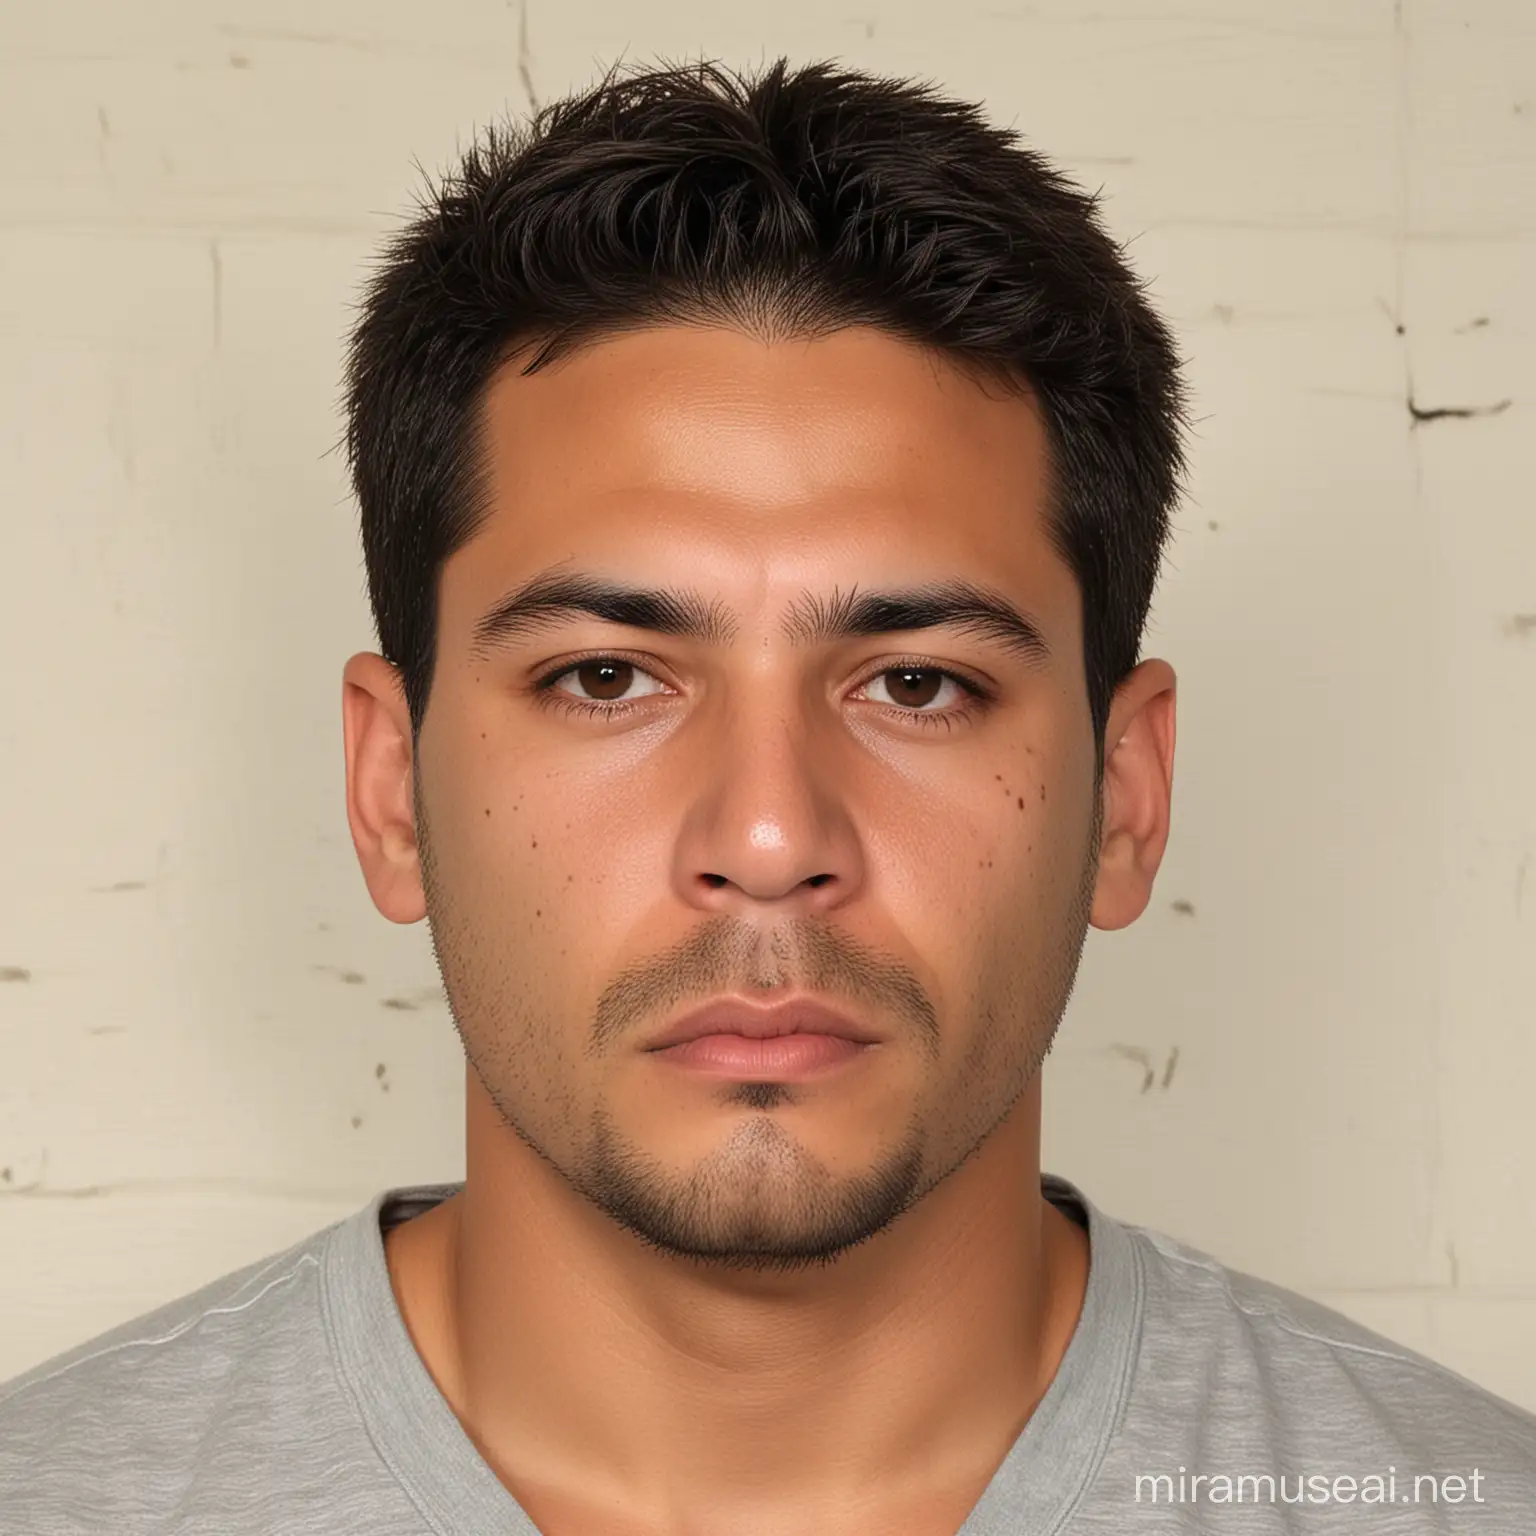 Wanted Criminal Mugshot of Michael Castro with Scar on Right Cheek